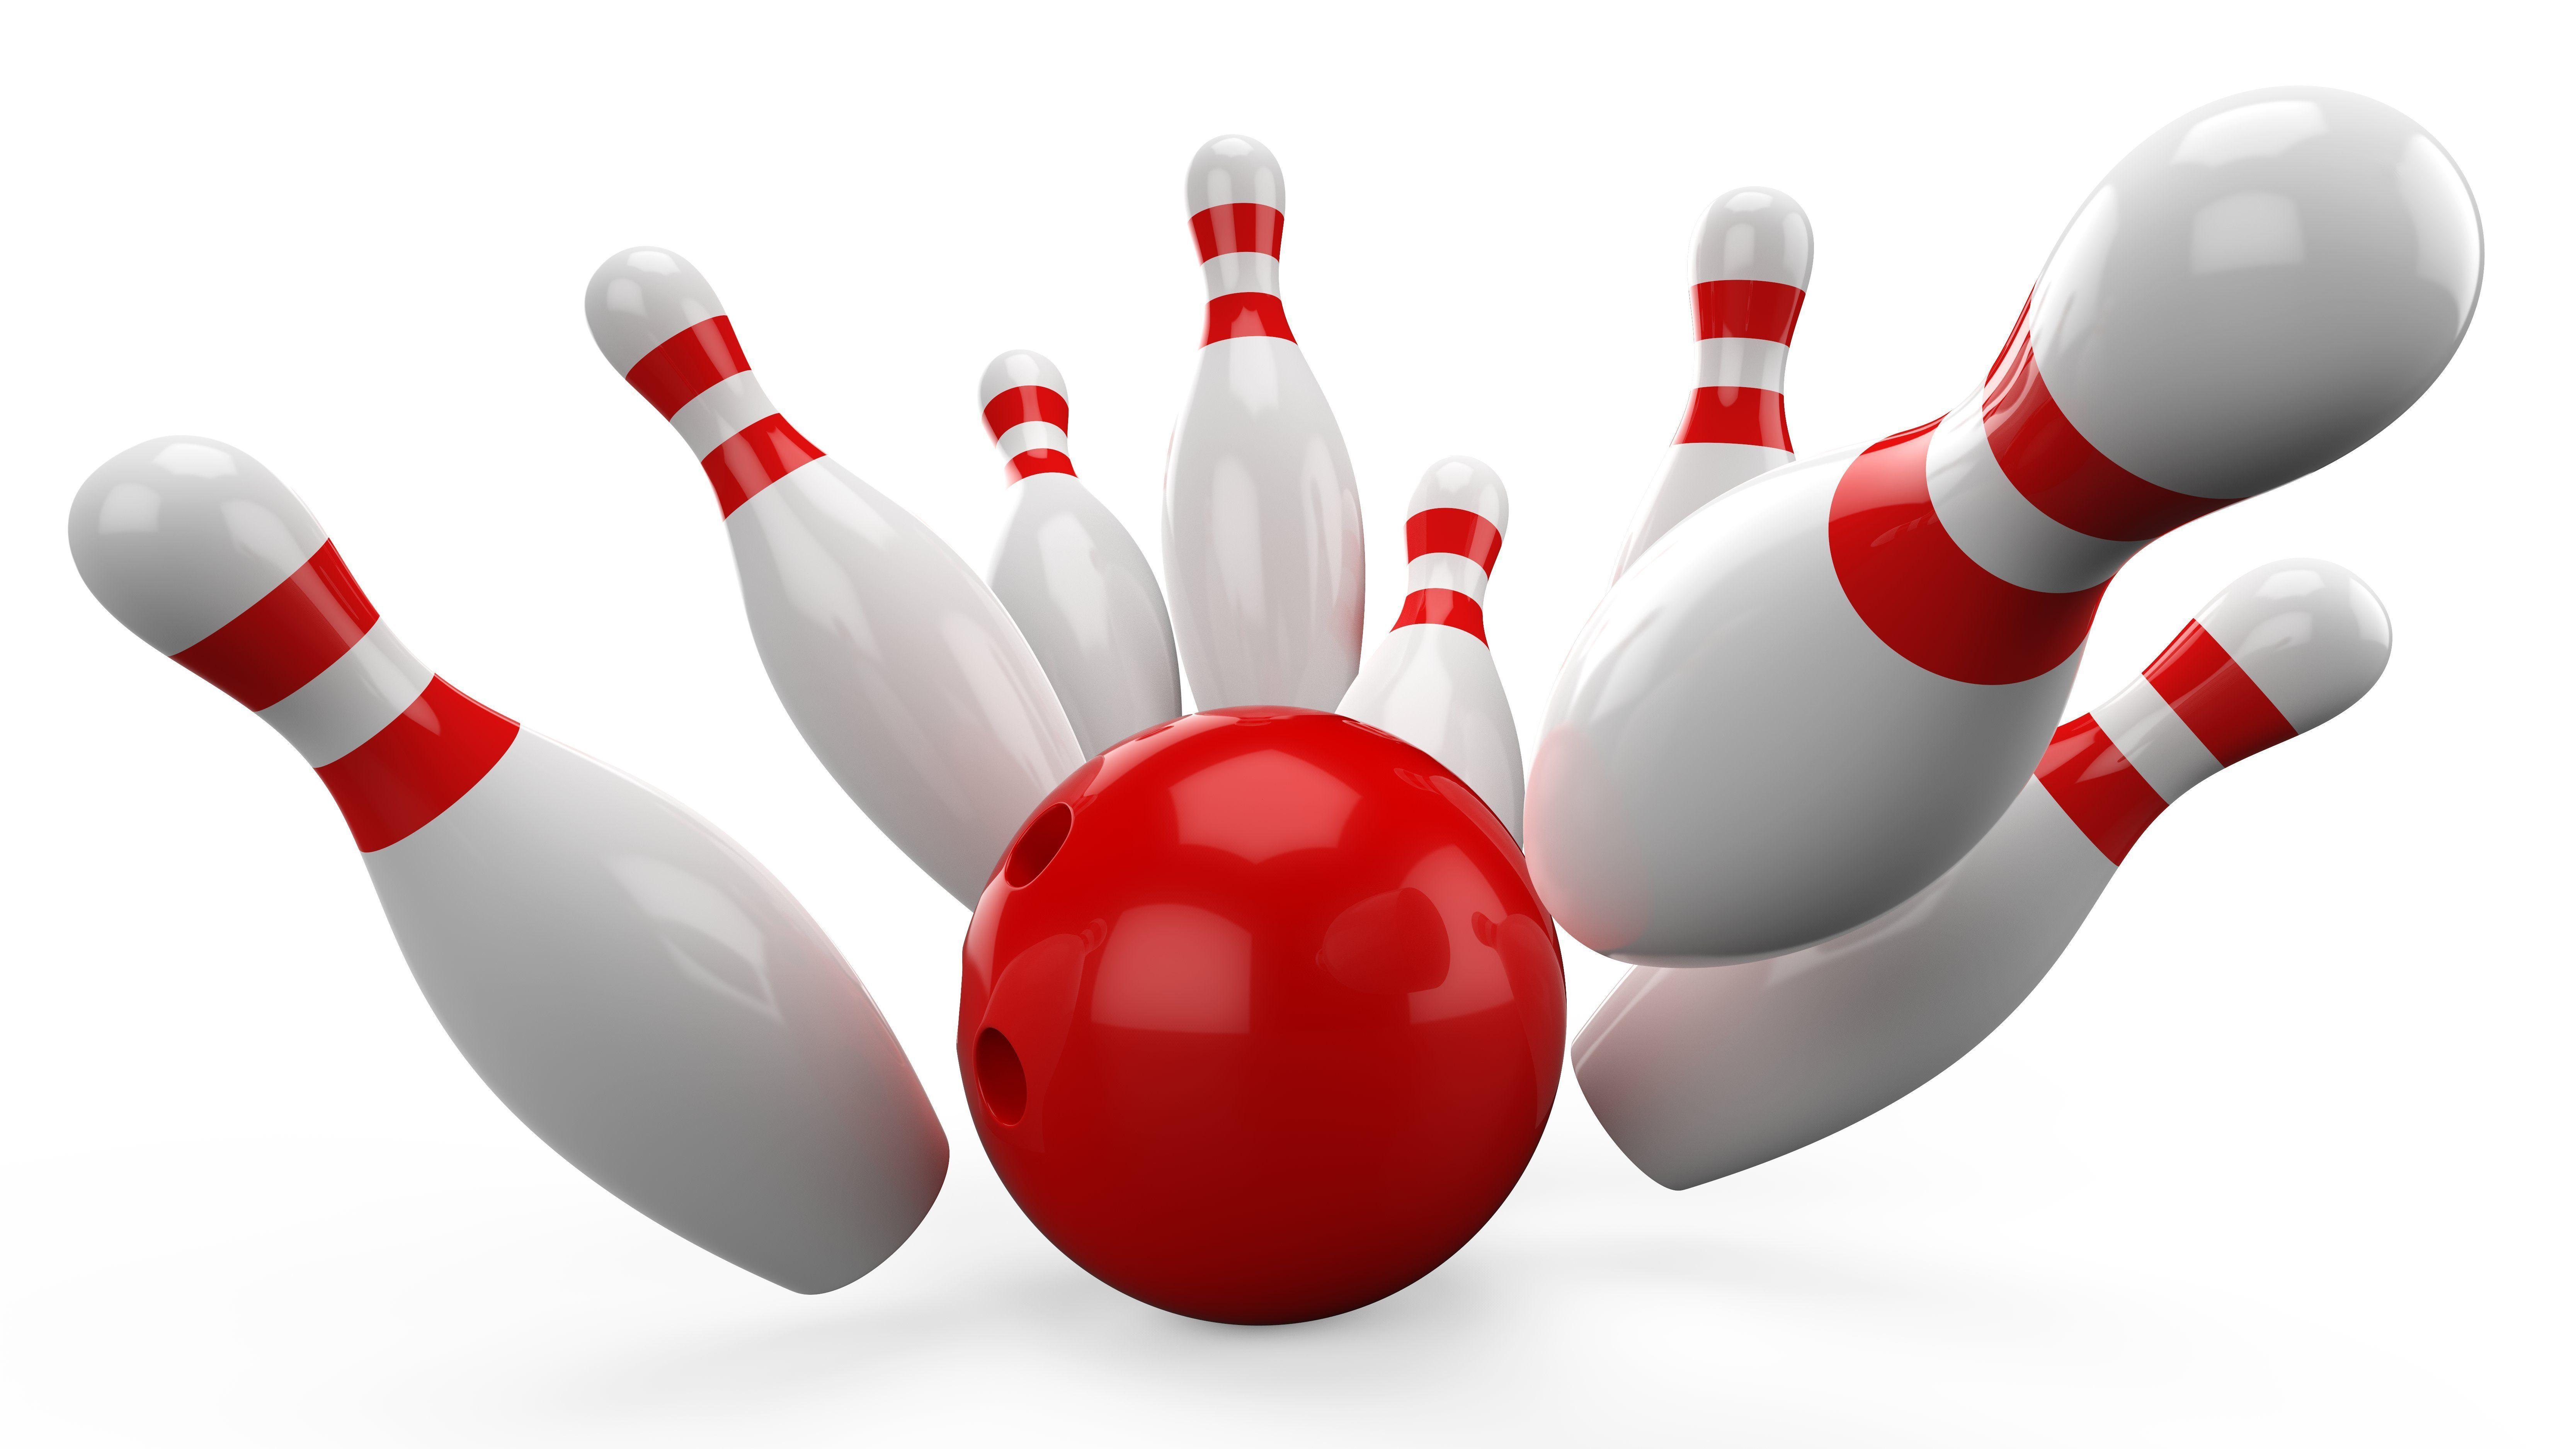 Bowling Alley Backgrounds